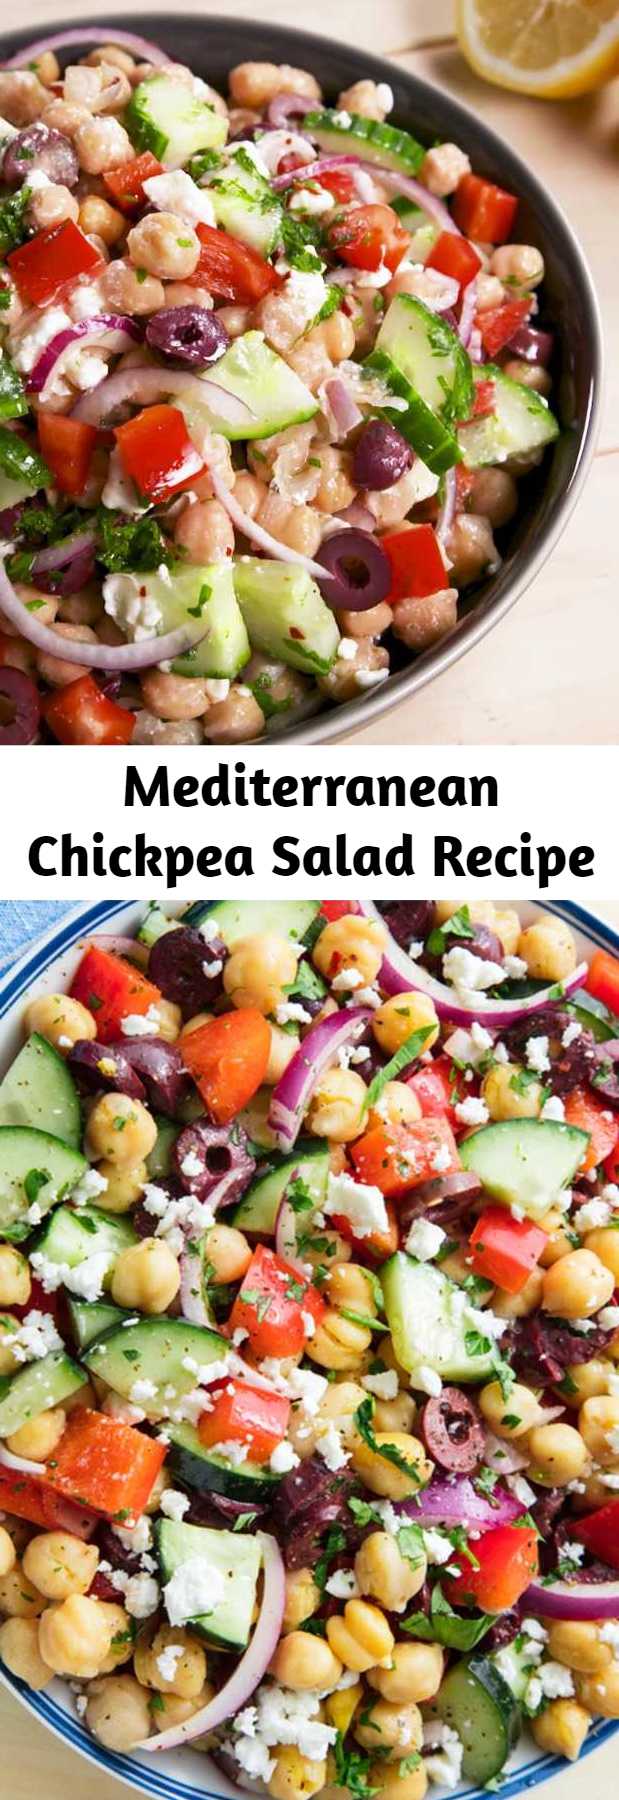 Mediterranean Chickpea Salad Recipe - Thanks to the chickpeas, this salad will keep you full for hours. It's satisfying in a way that leafy greens never could be. Sorry we're not sorry, kale. #easyrecipe #salad #mediterranean #summer #sidedish